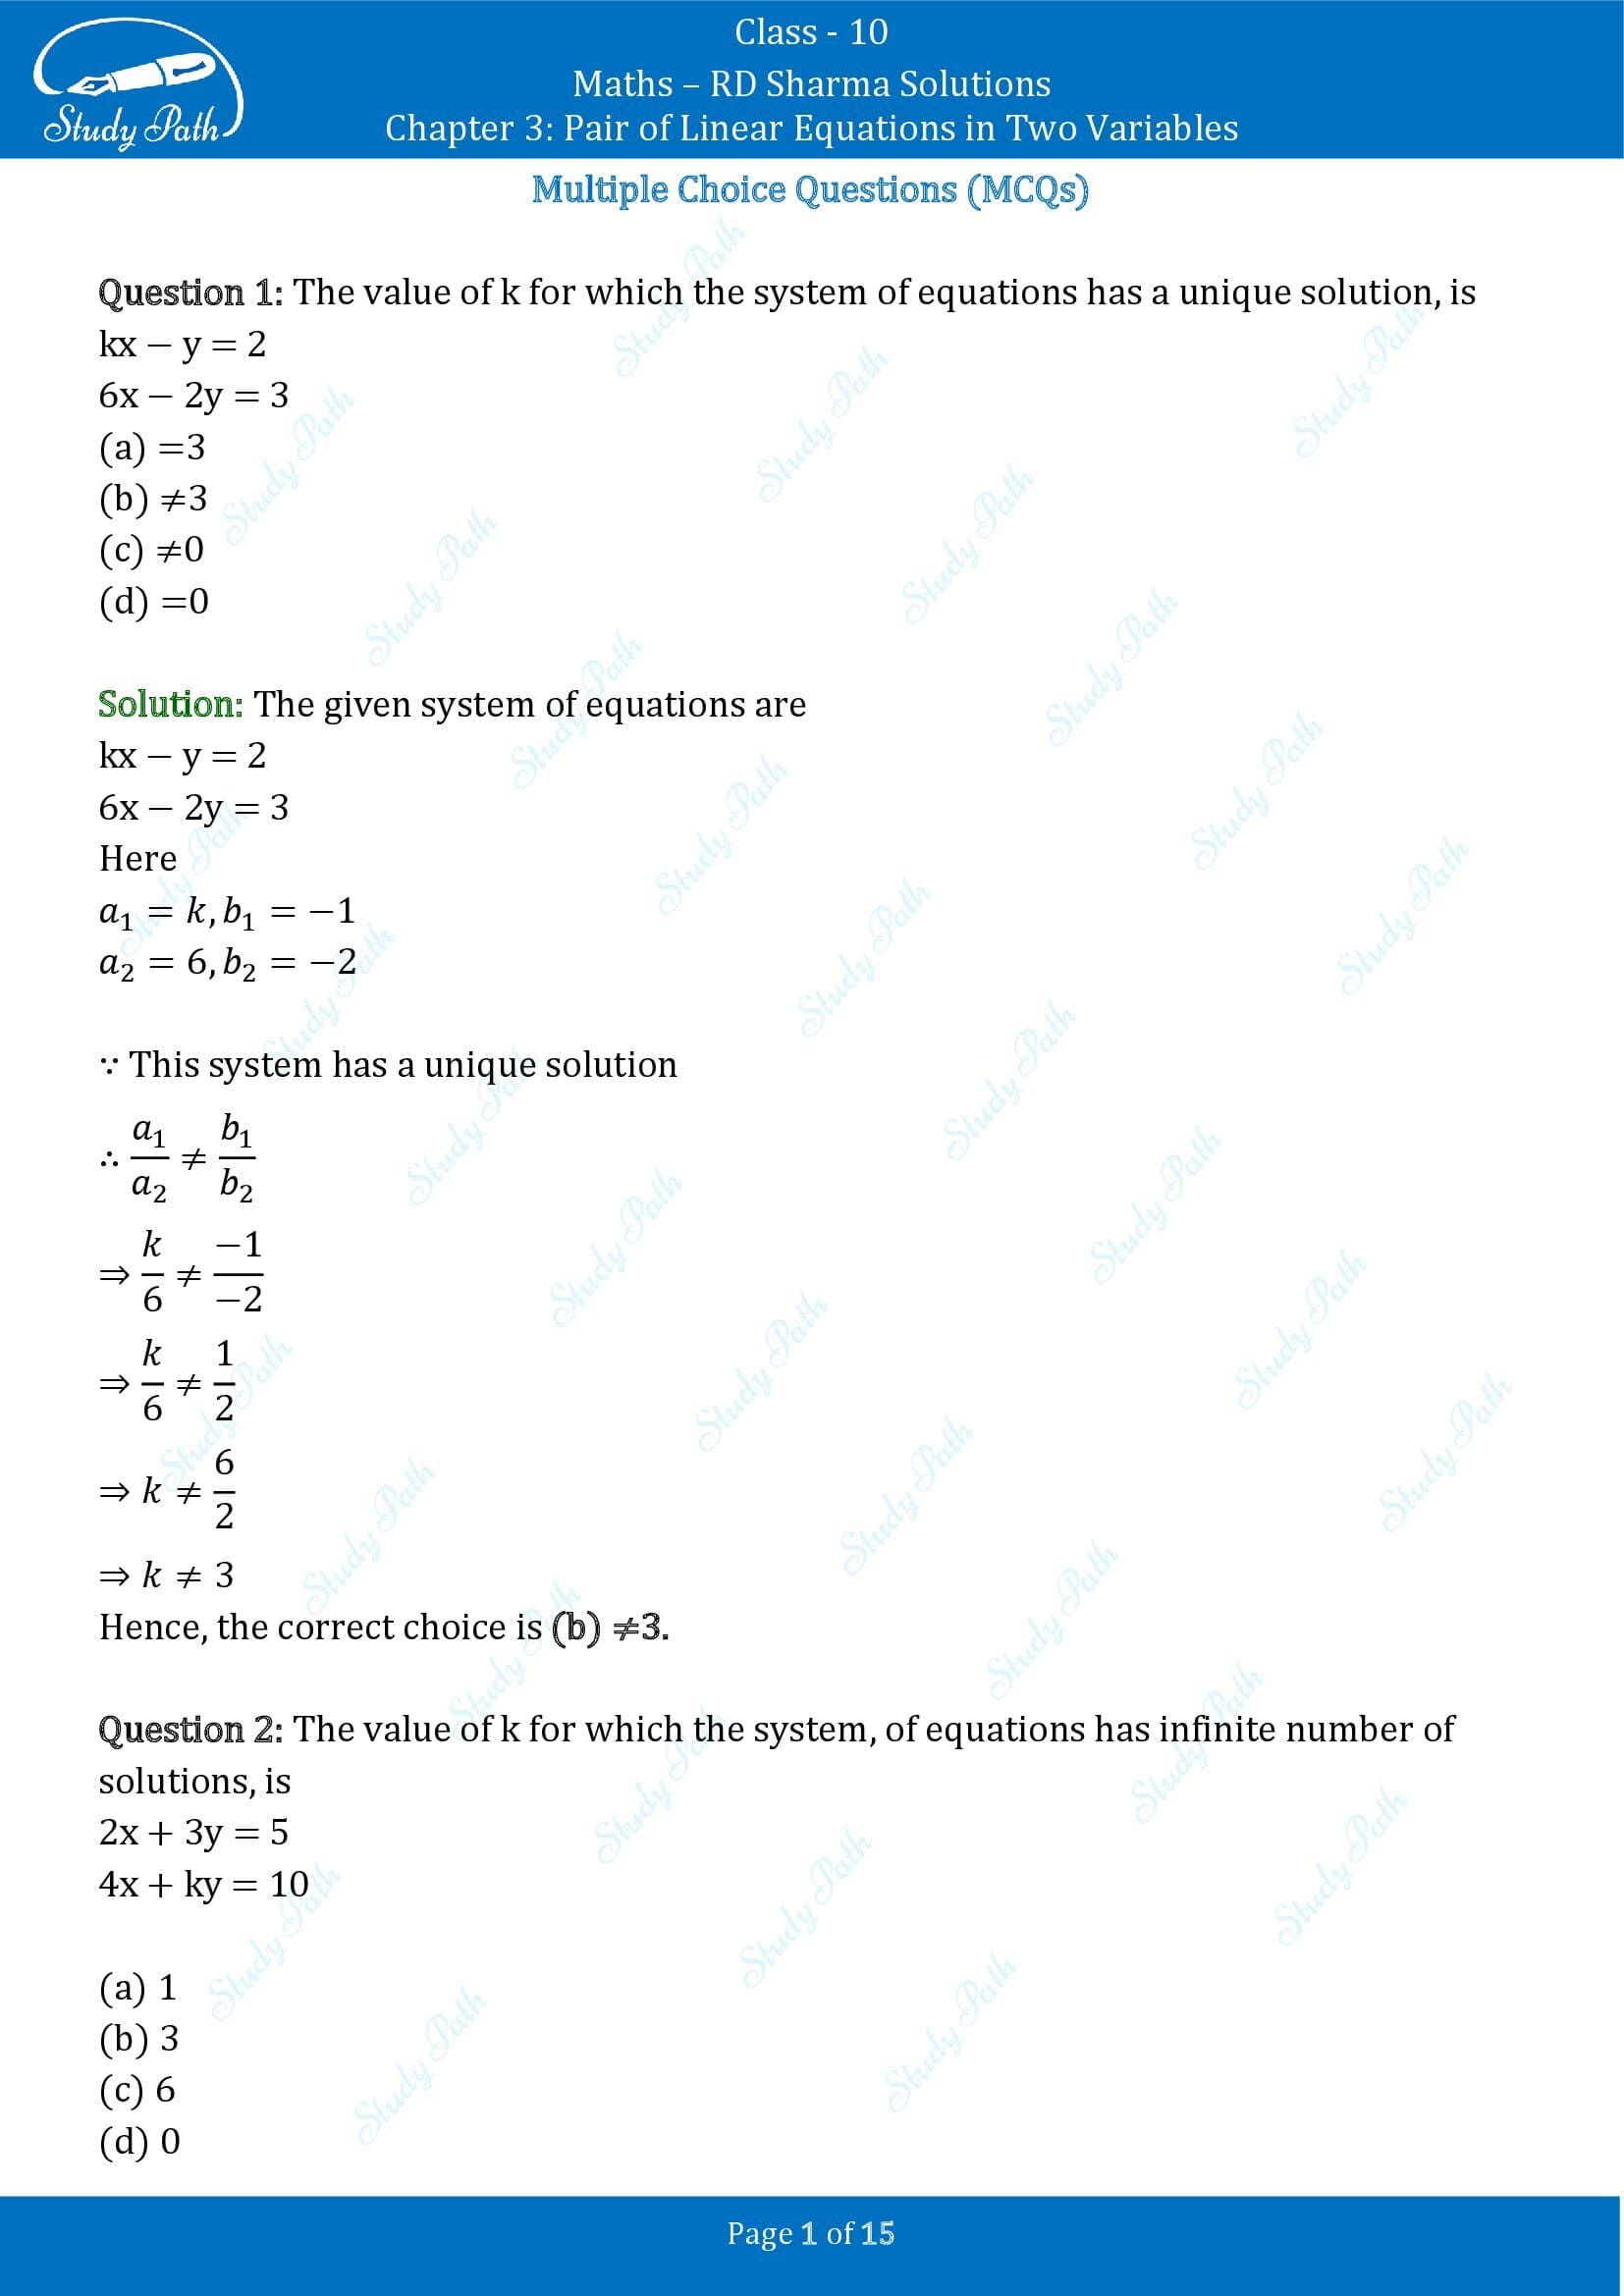 RD Sharma Solutions Class 10 Chapter 3 Pair of Linear Equations in Two Variables Multiple Choice Questions MCQs 00001